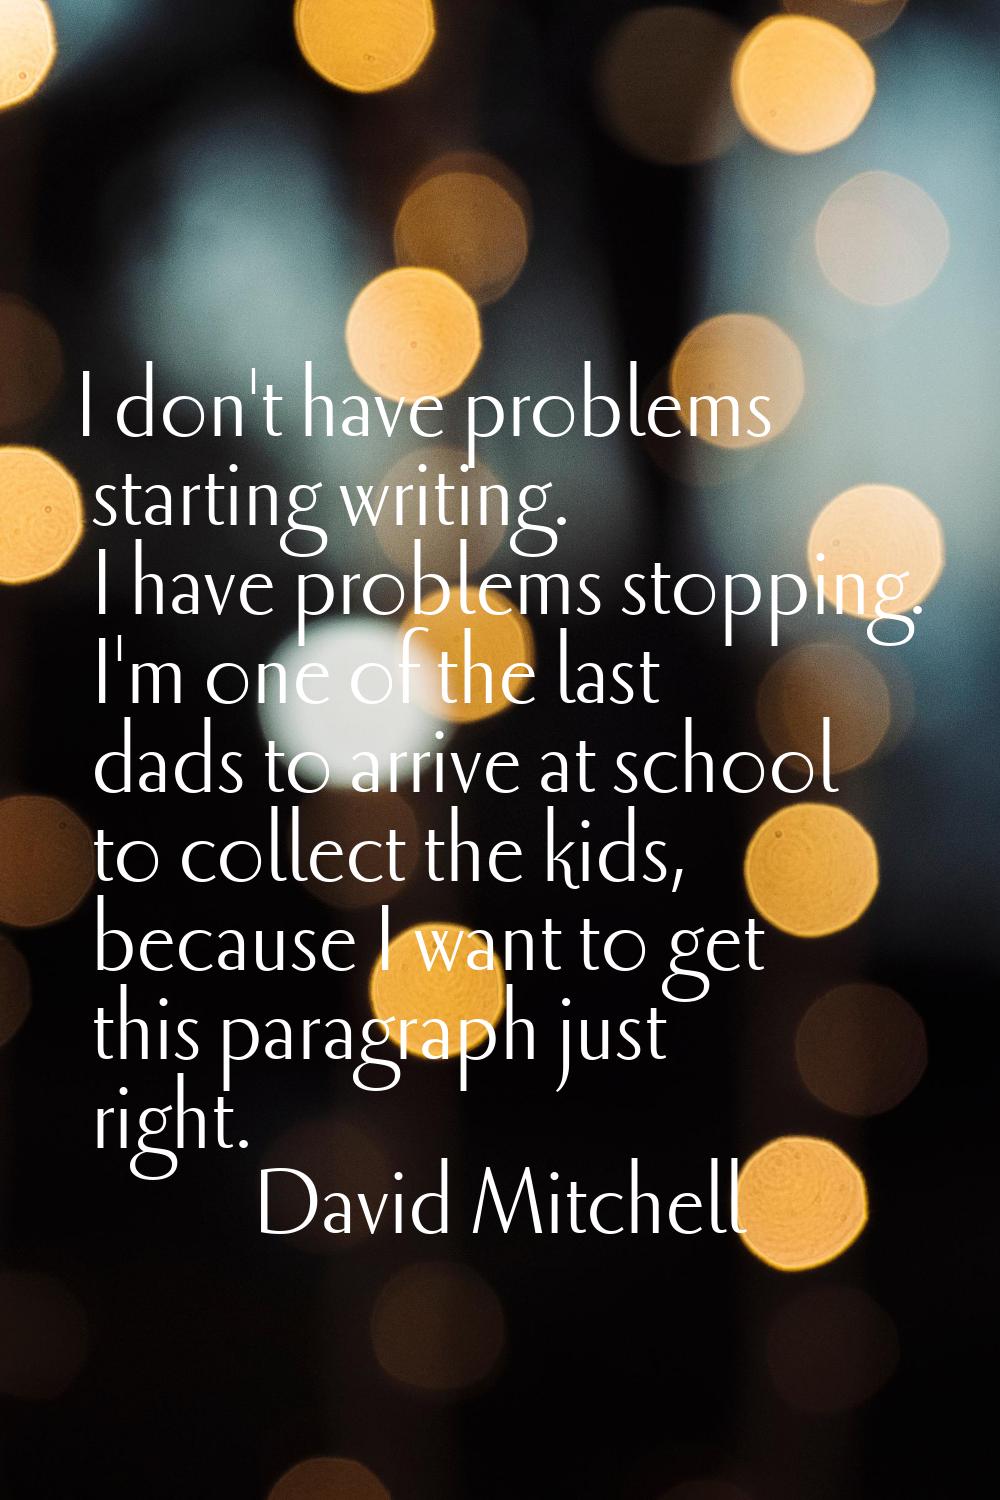 I don't have problems starting writing. I have problems stopping. I'm one of the last dads to arriv